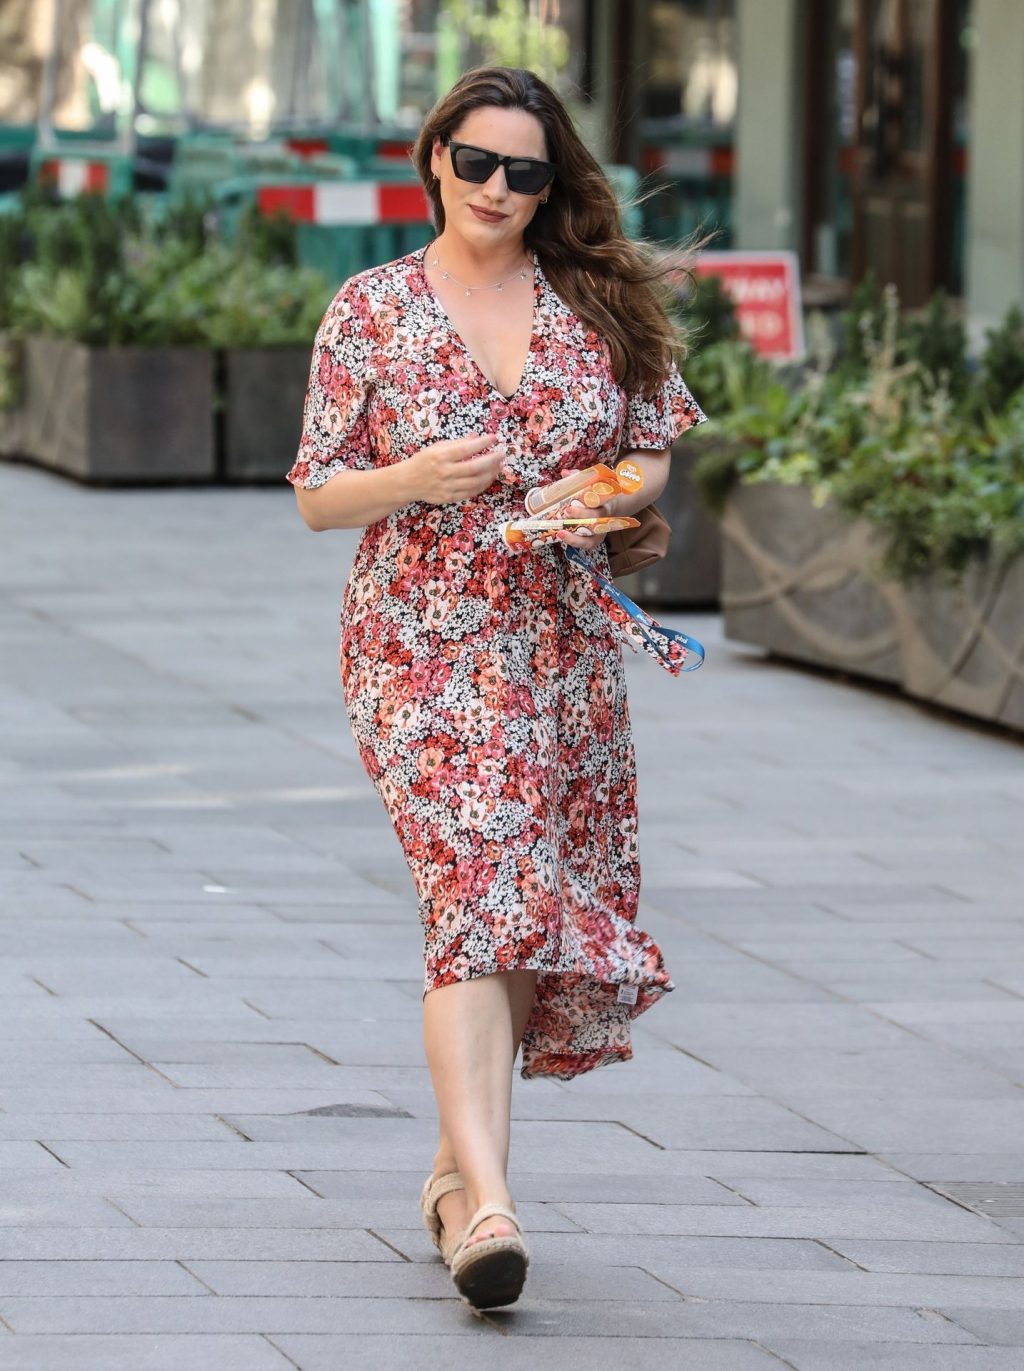 Kelly Brook Hides Her Sexy Boobs From The Paparazzi (49 Photos)